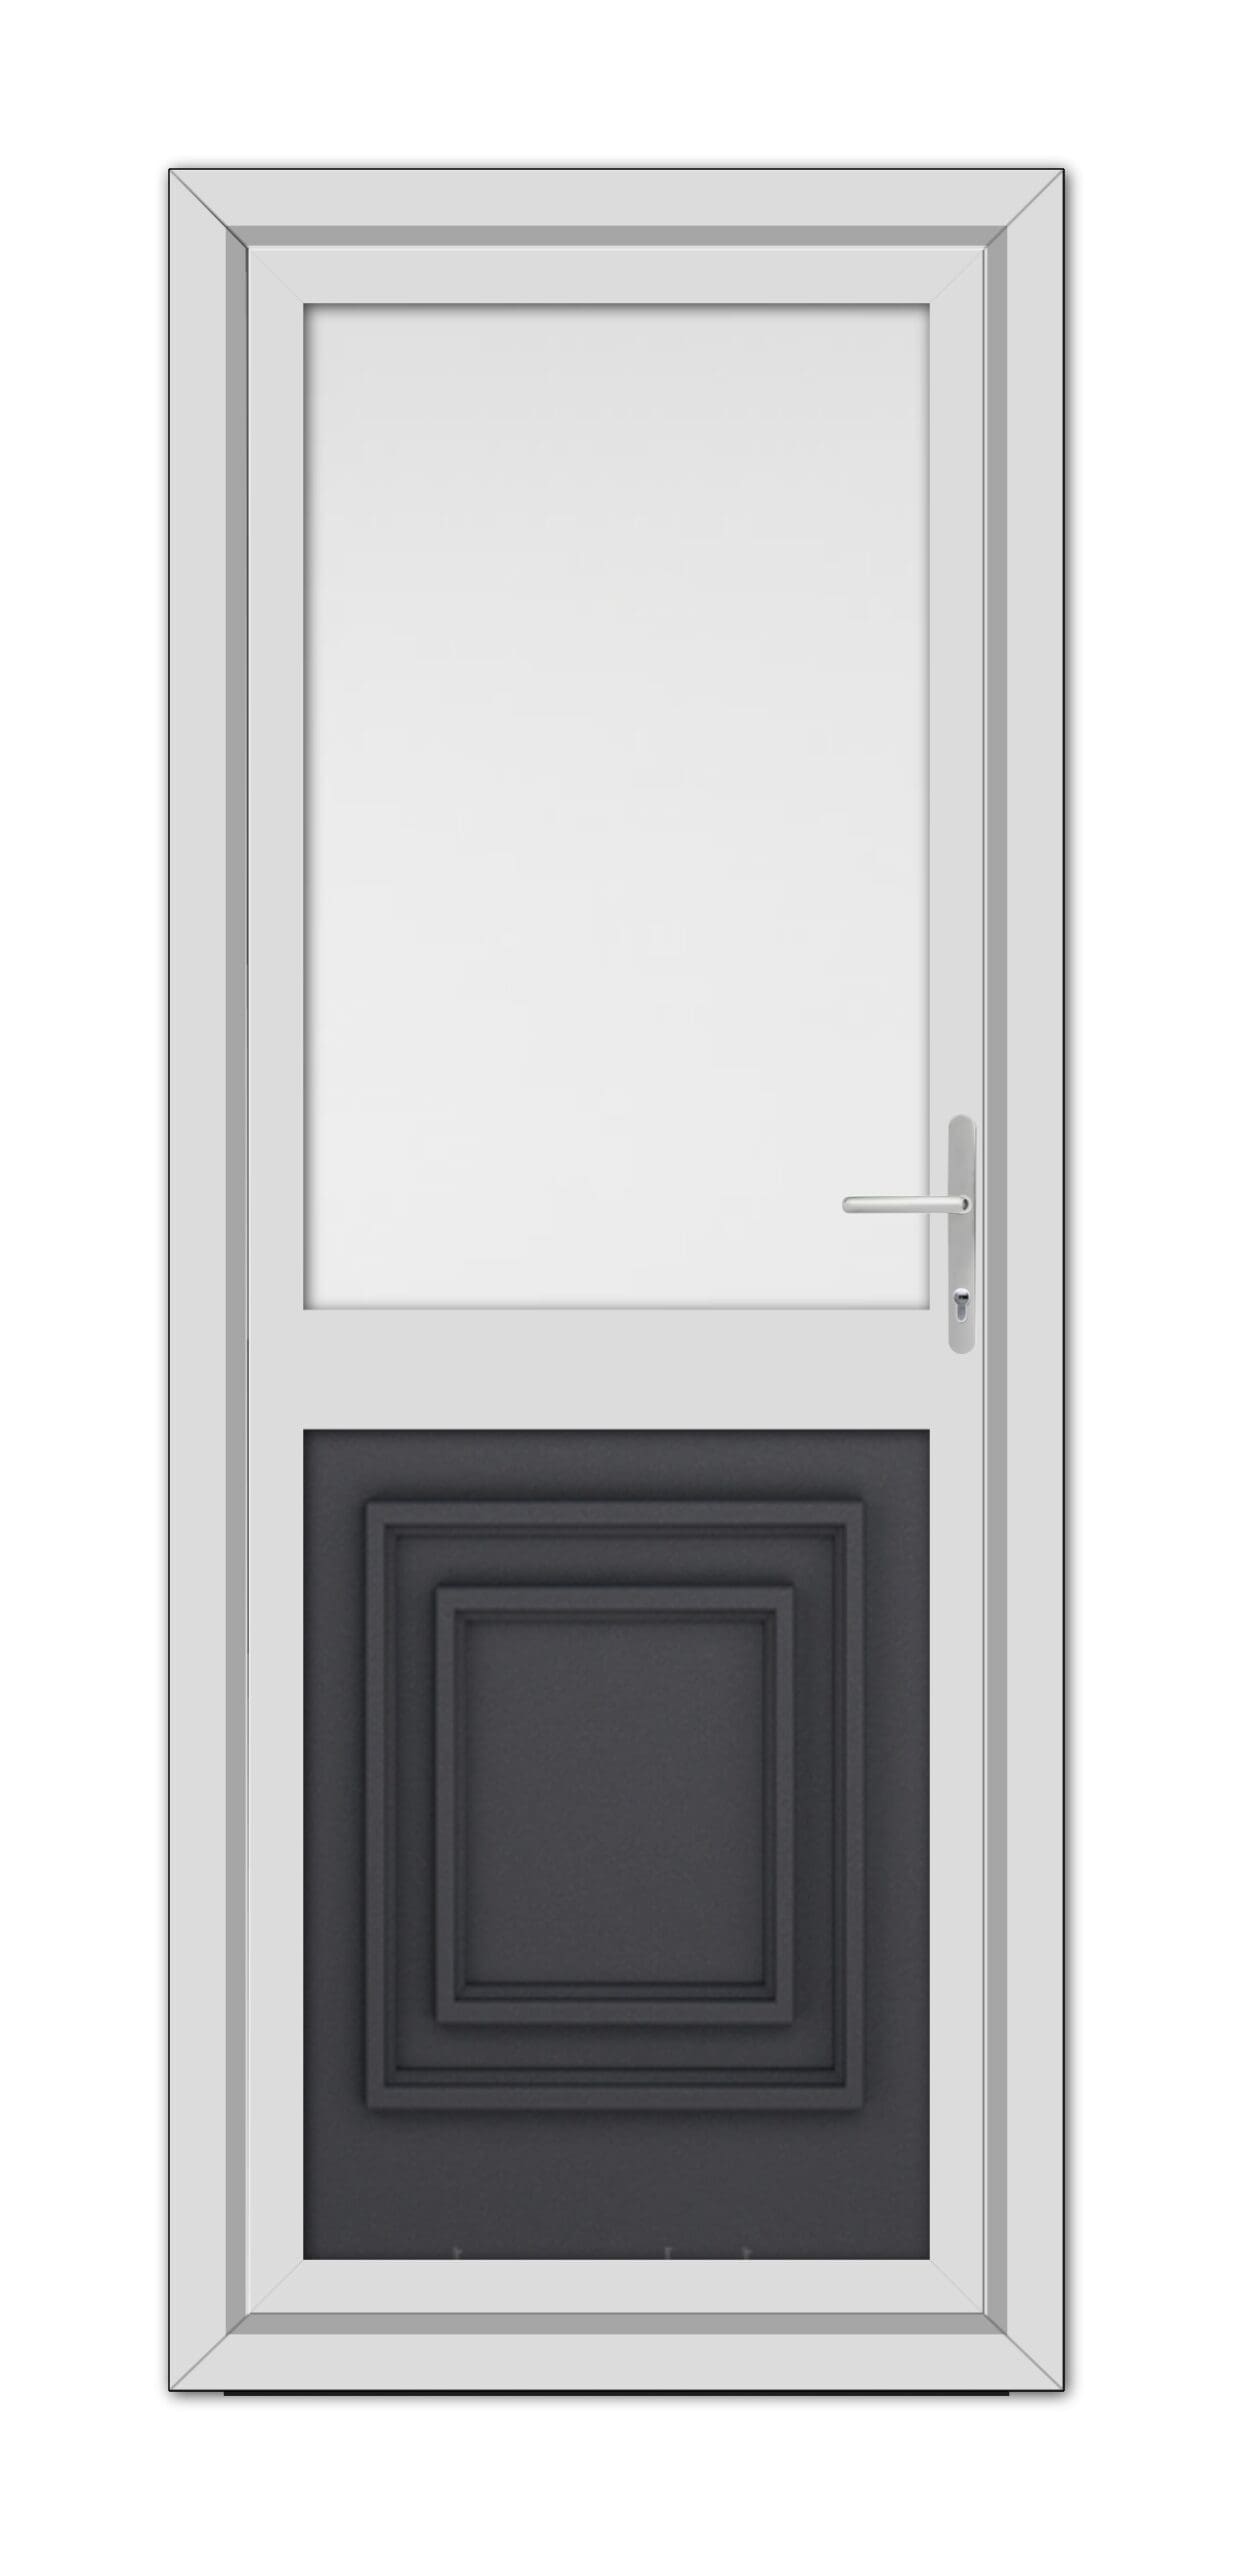 A modern Grey Grained Hannover Half uPVC Back Door with a large rectangular window at the top and a raised black panel at the bottom, equipped with a silver handle on the right side.